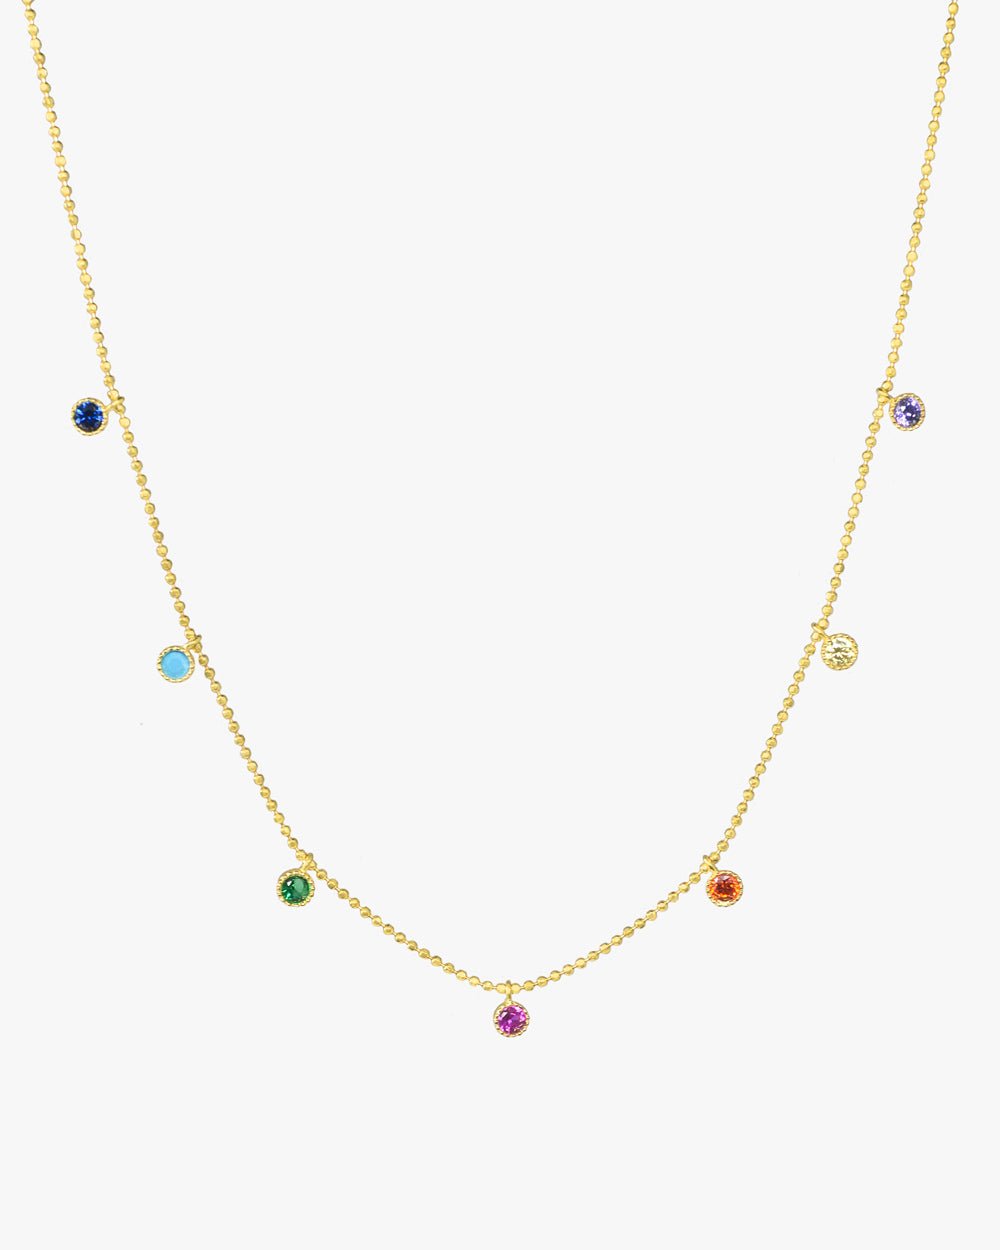 TALLULAH BEZEL SHAKER NECKLACE - Shop Cupcakes and Cashmere